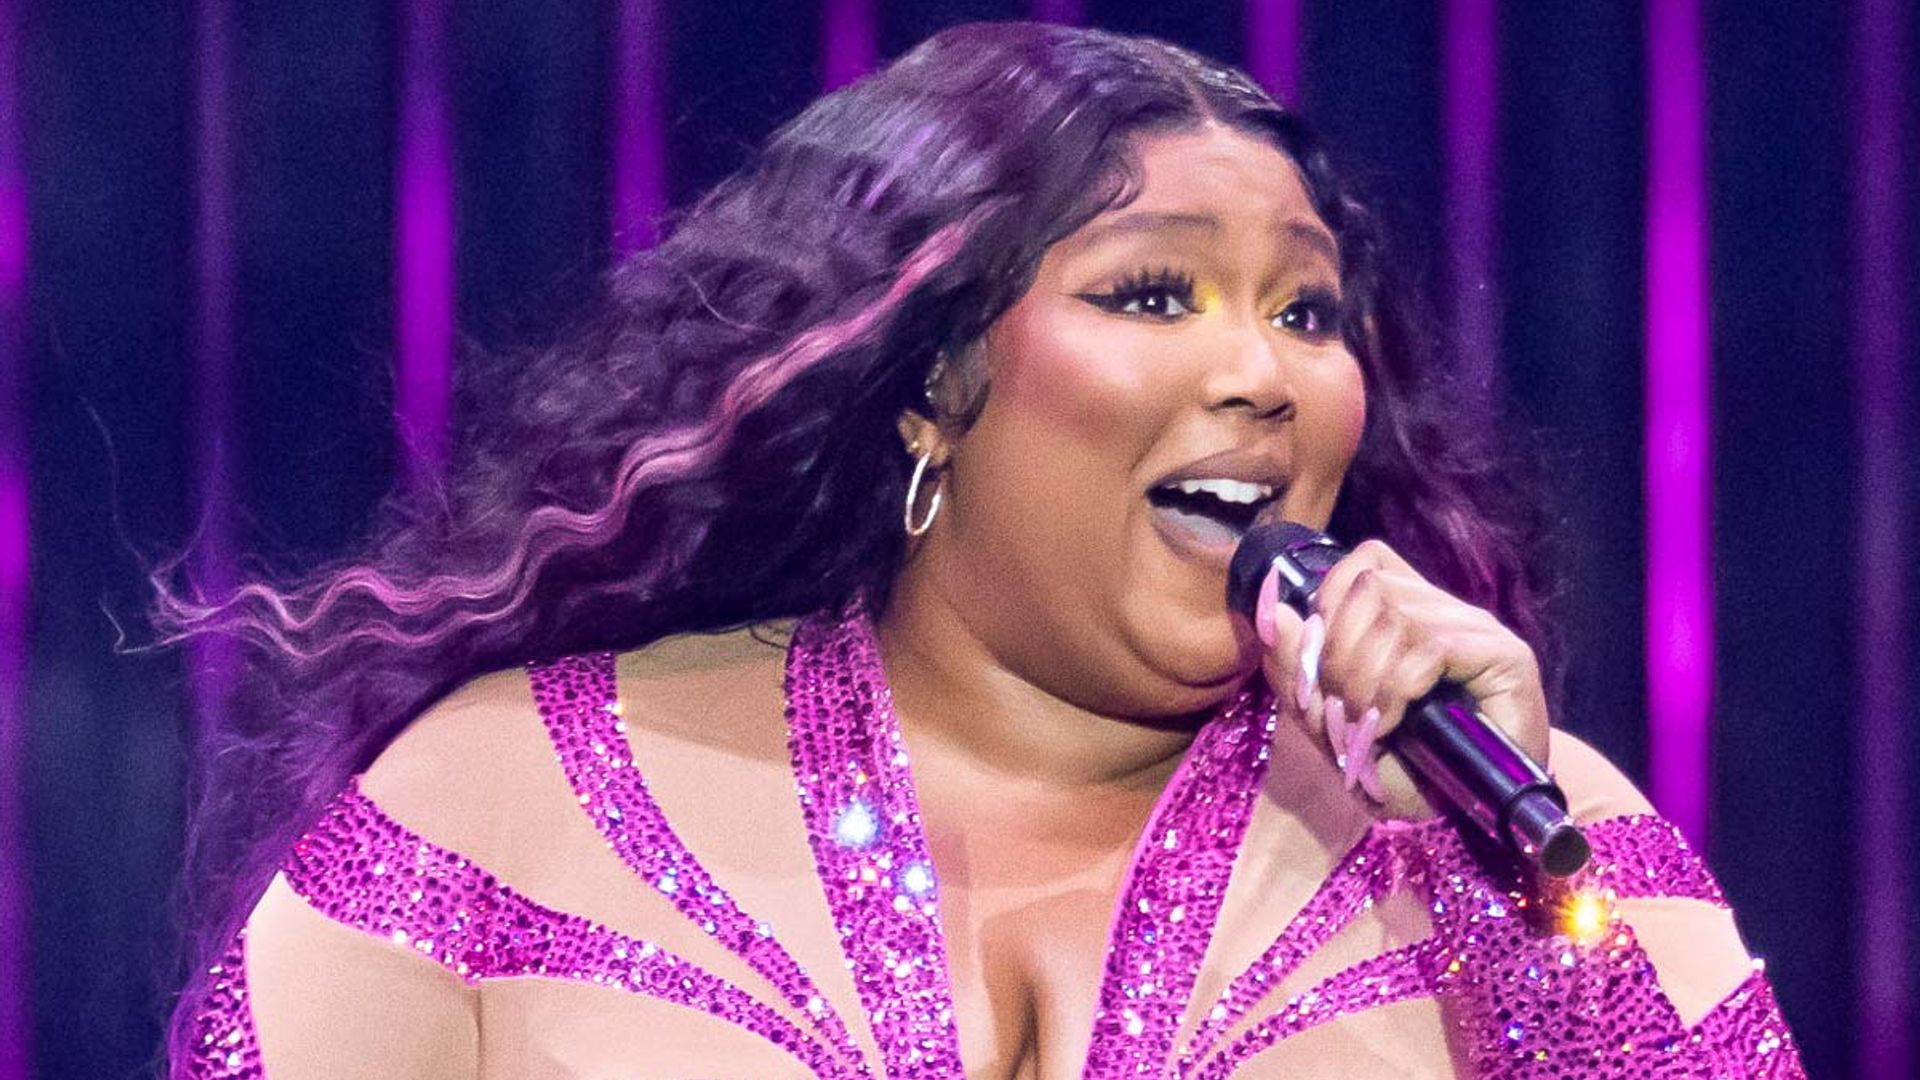 Lizzo drops jaws in thigh-high boots and leotard after Kanye West's weight  jibe